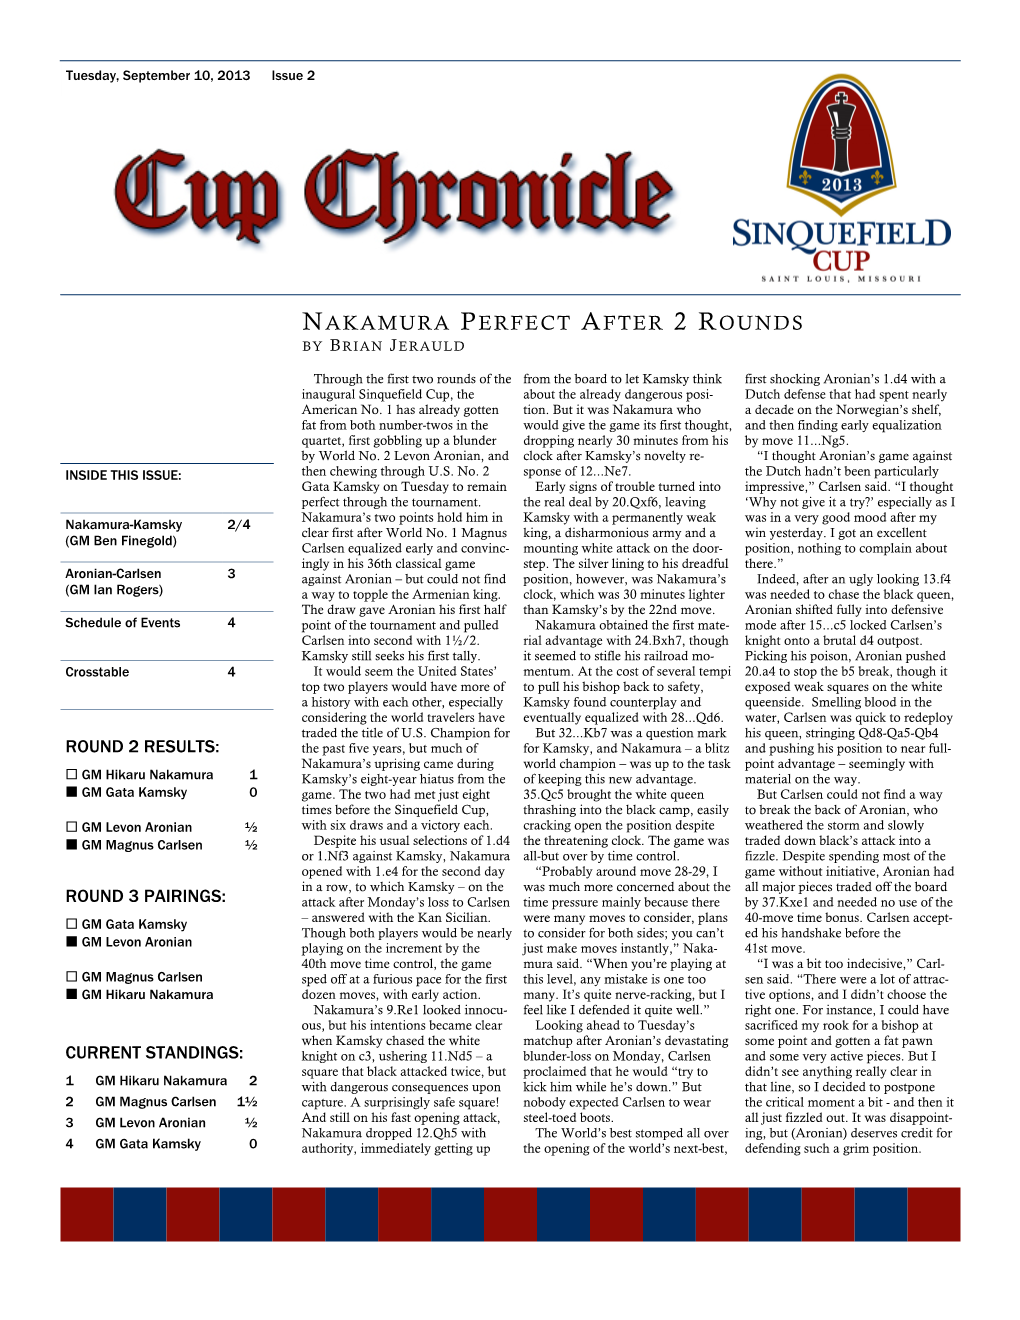 Sinquefield Cup Bulletin Issue 2